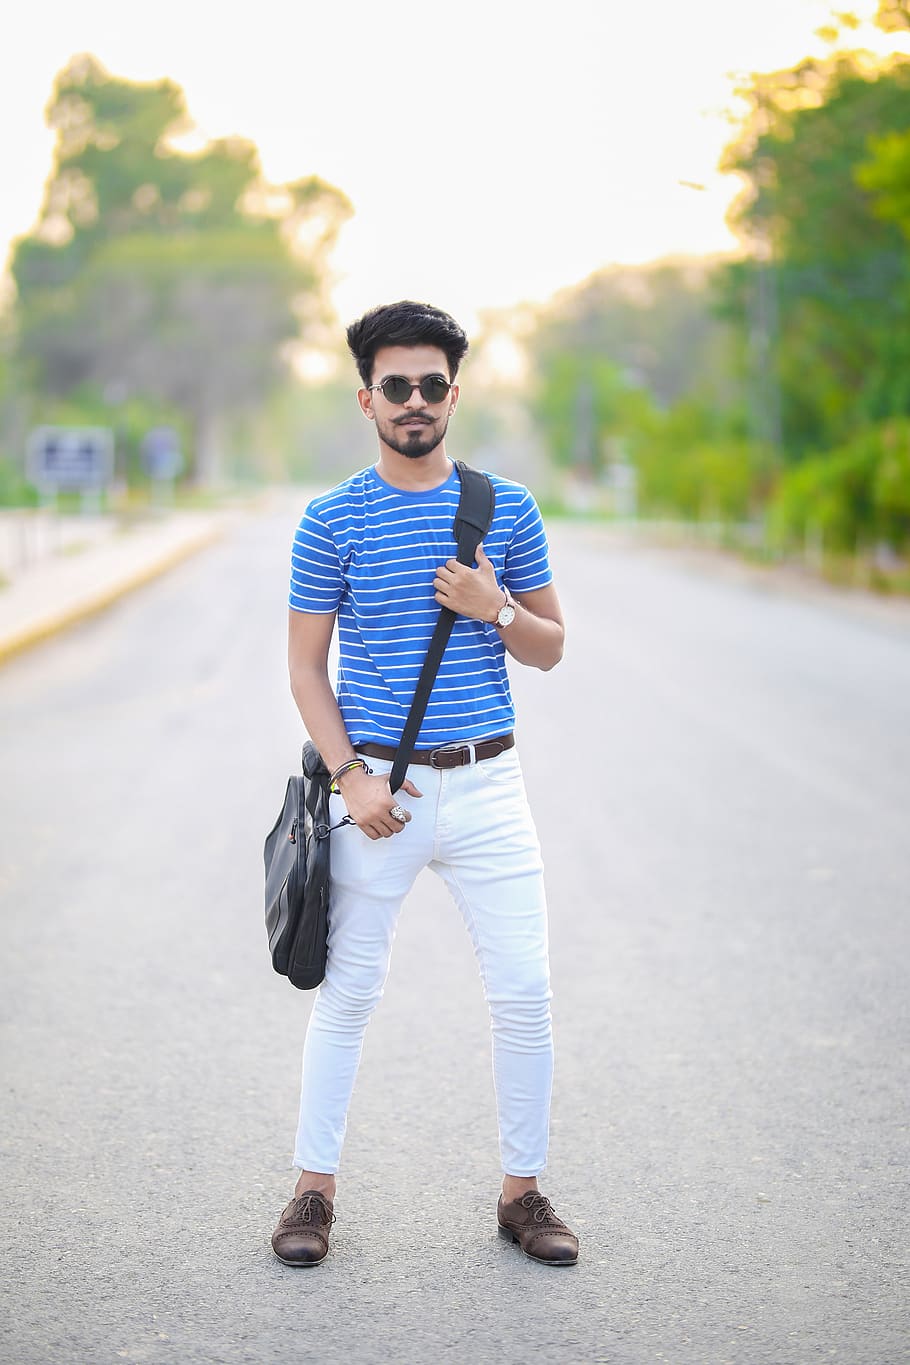 pakistani boy, model, portrait, posing, outdoors, person, full length, one person, sunglasses, real people